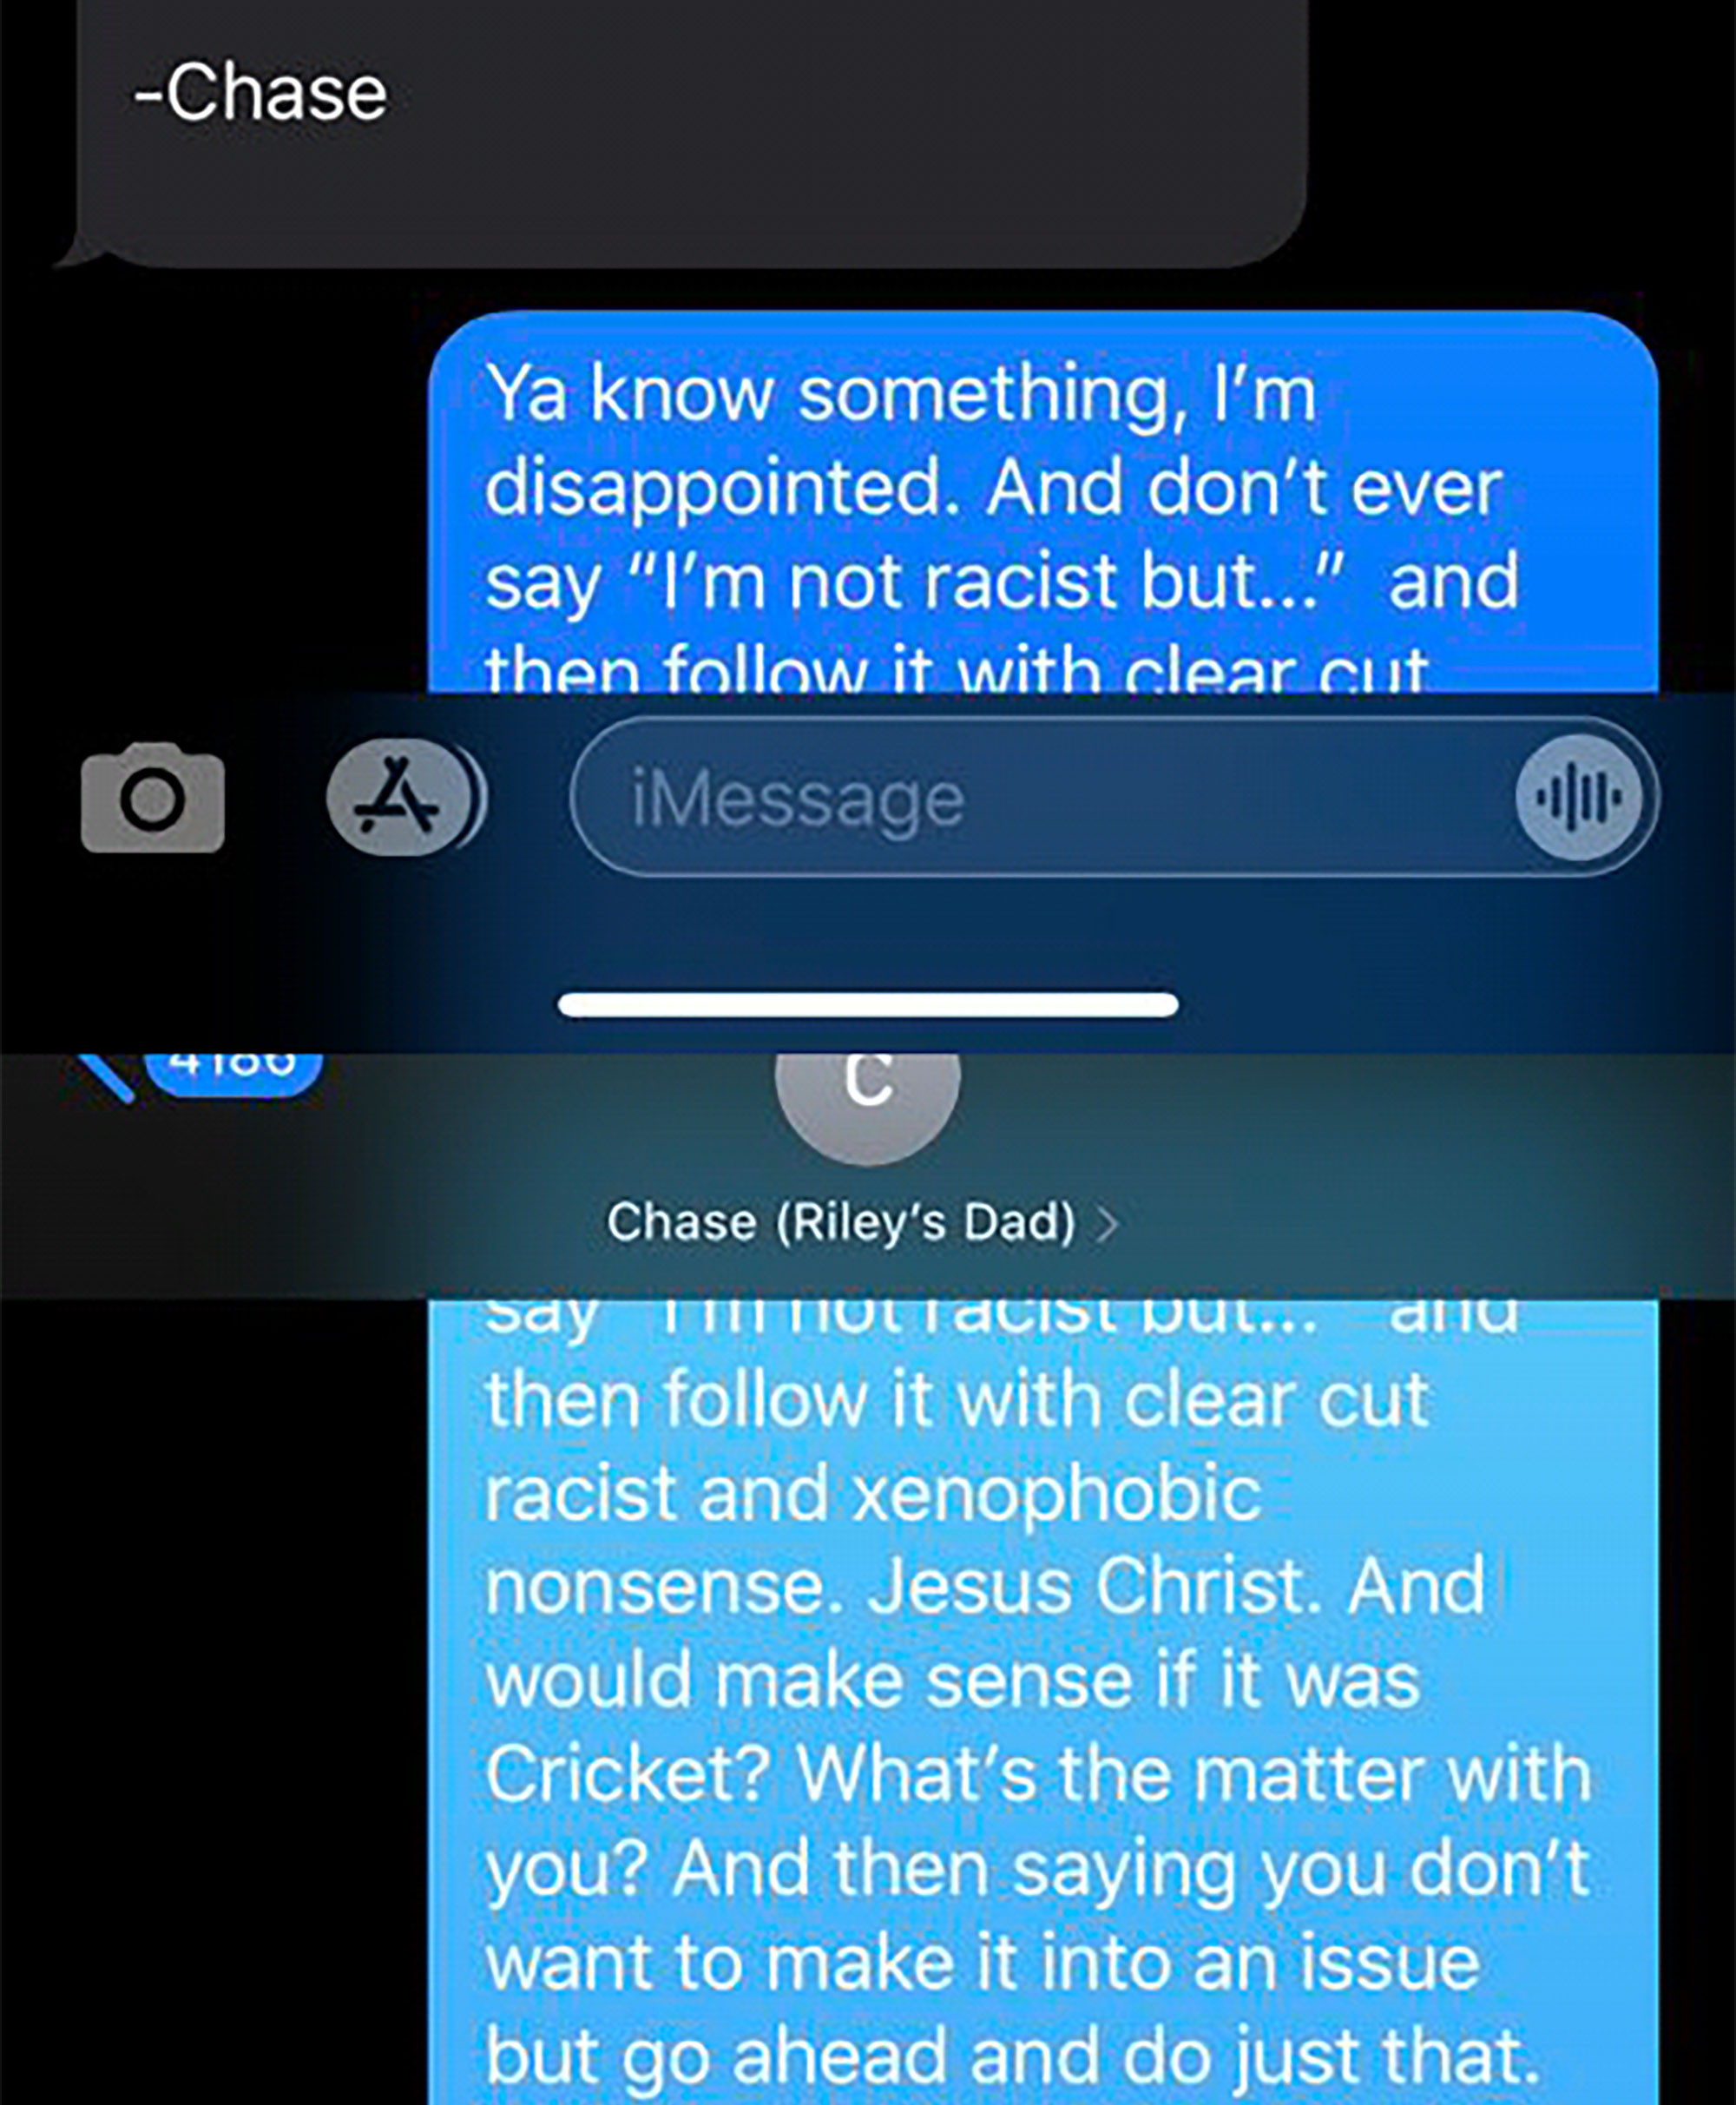 screenshot - Chase Ya know something, I'm disappointed. And don't ever say "I'm not racist but..." and then it with clear cut iMessage Tou Chase Riley's Dad > say Mtuu TAUisu puu... anu then it with clear cut racist and xenophobic nonsense. Jesus Christ. 